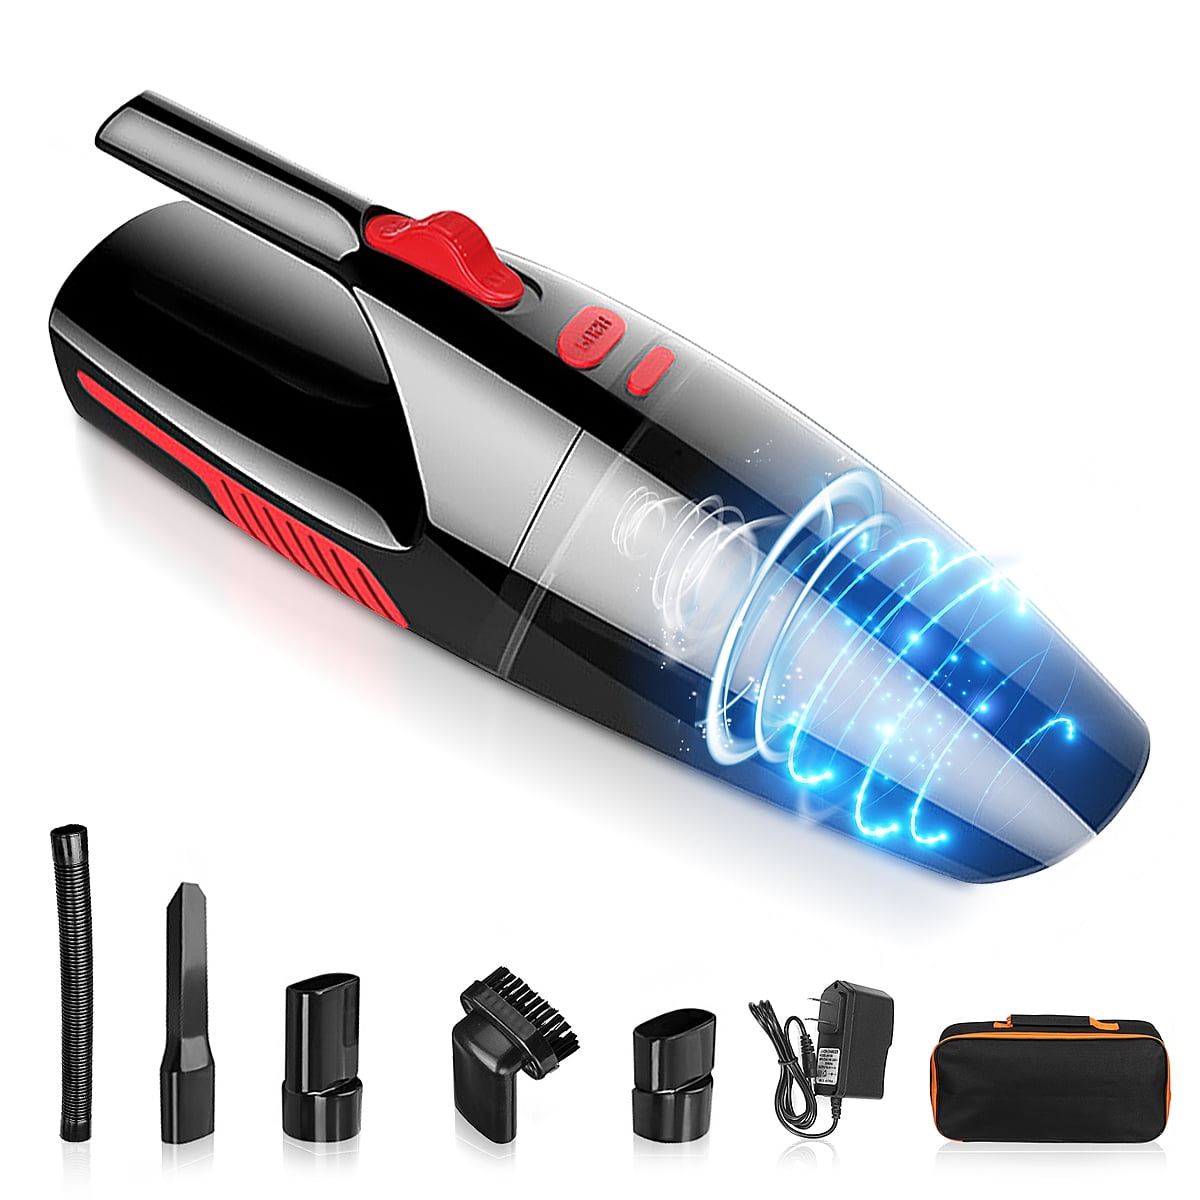 Strong Powerful Suction,120 W Low Noise Lightweight Hoover Dry Vacuum Cleaner for Cars Qi Standard Handheld Vacuum Cleaner Portable Car Vacuum Cleaner